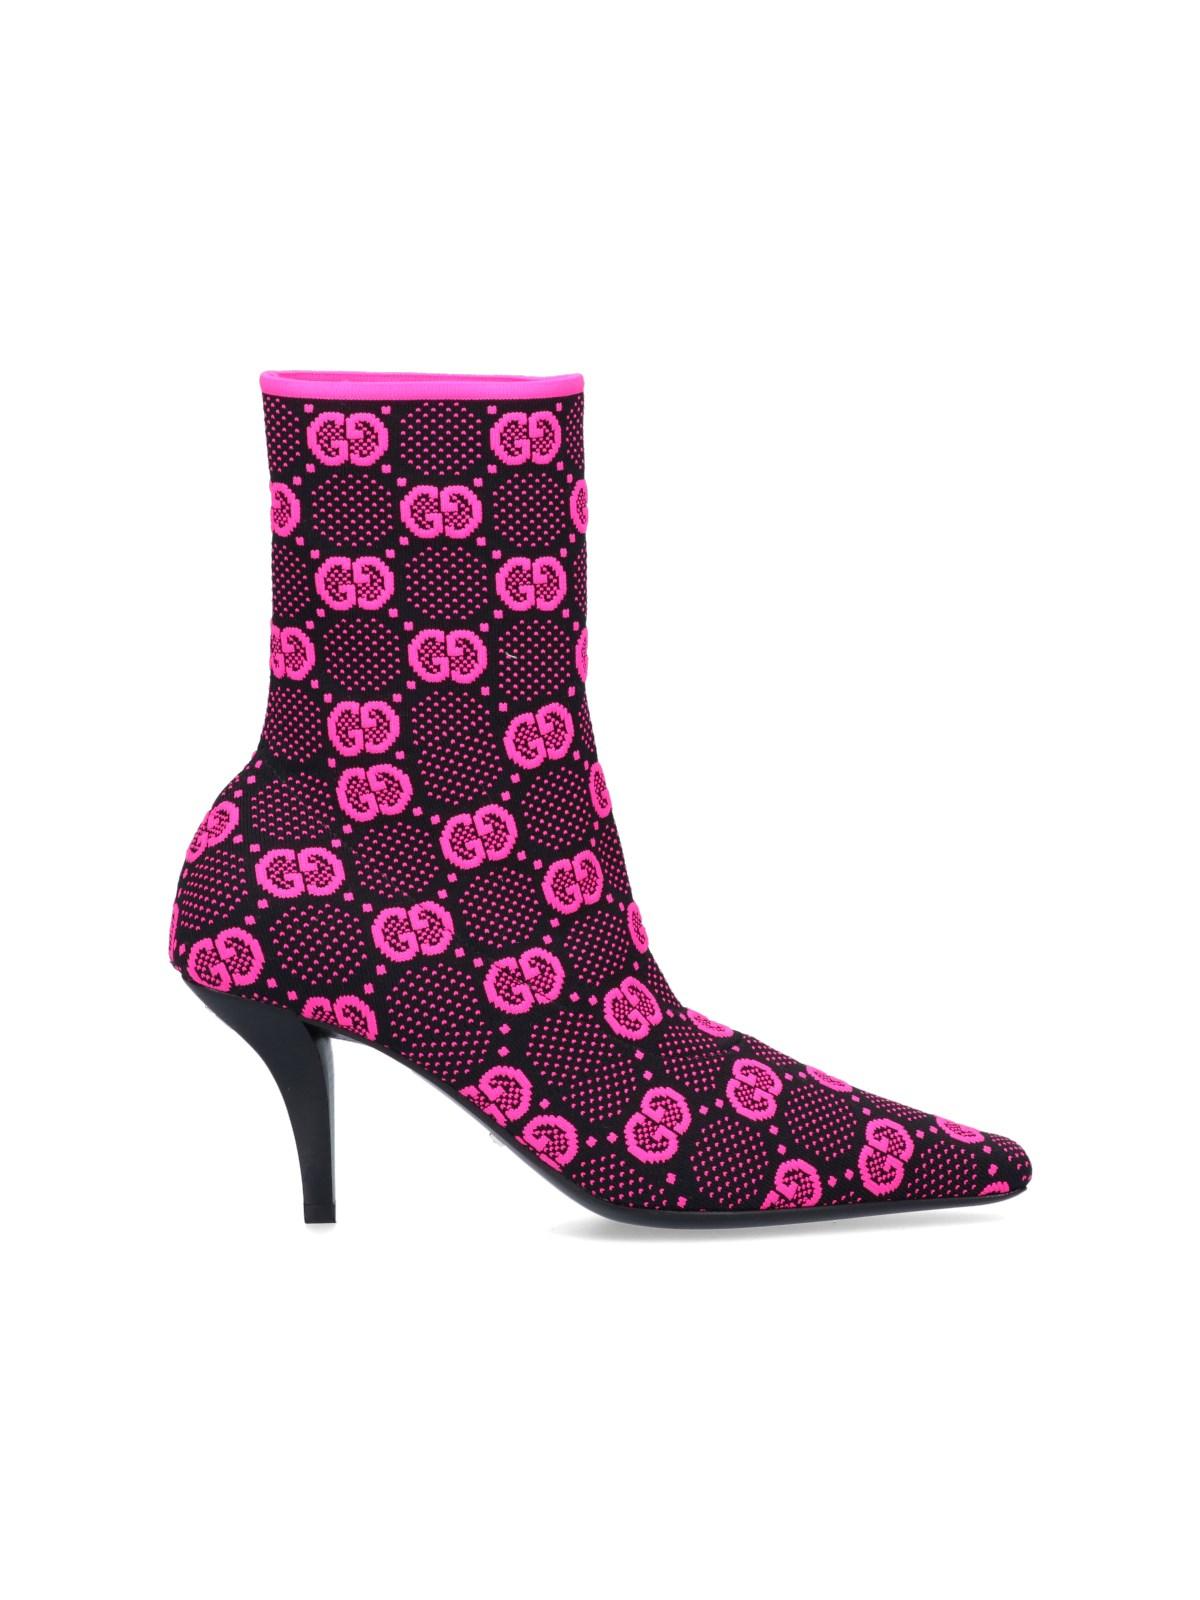 Gucci 'Gg' Knitted Ankle Boots in Purple | Lyst